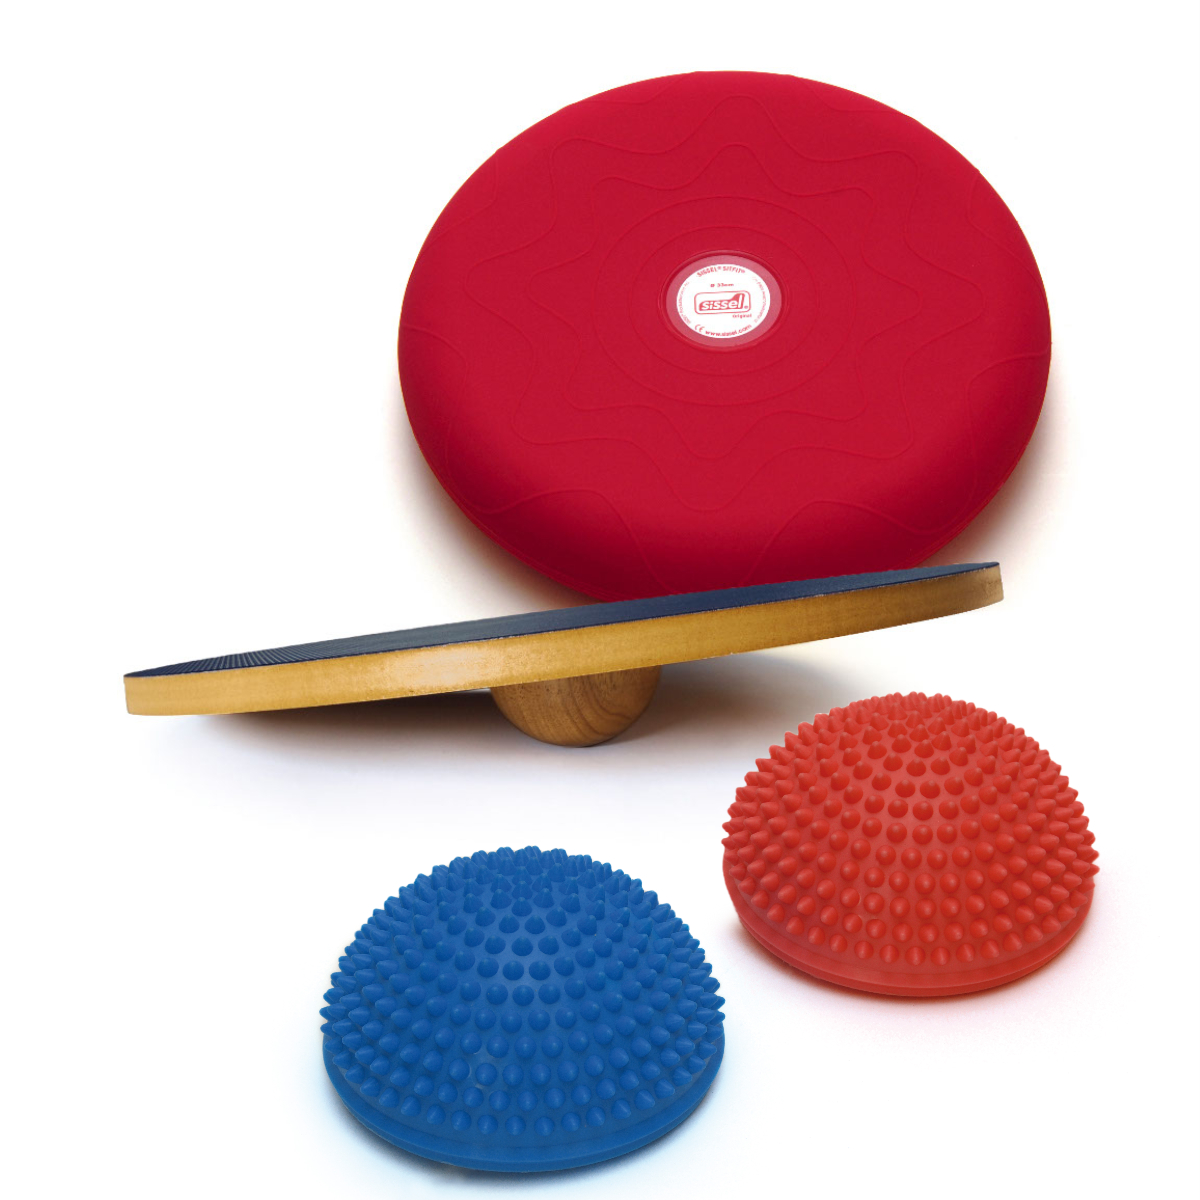 KIT EQUILIBRIO: Spiky Dome, Balanced Board e Sitfit 33 rosso